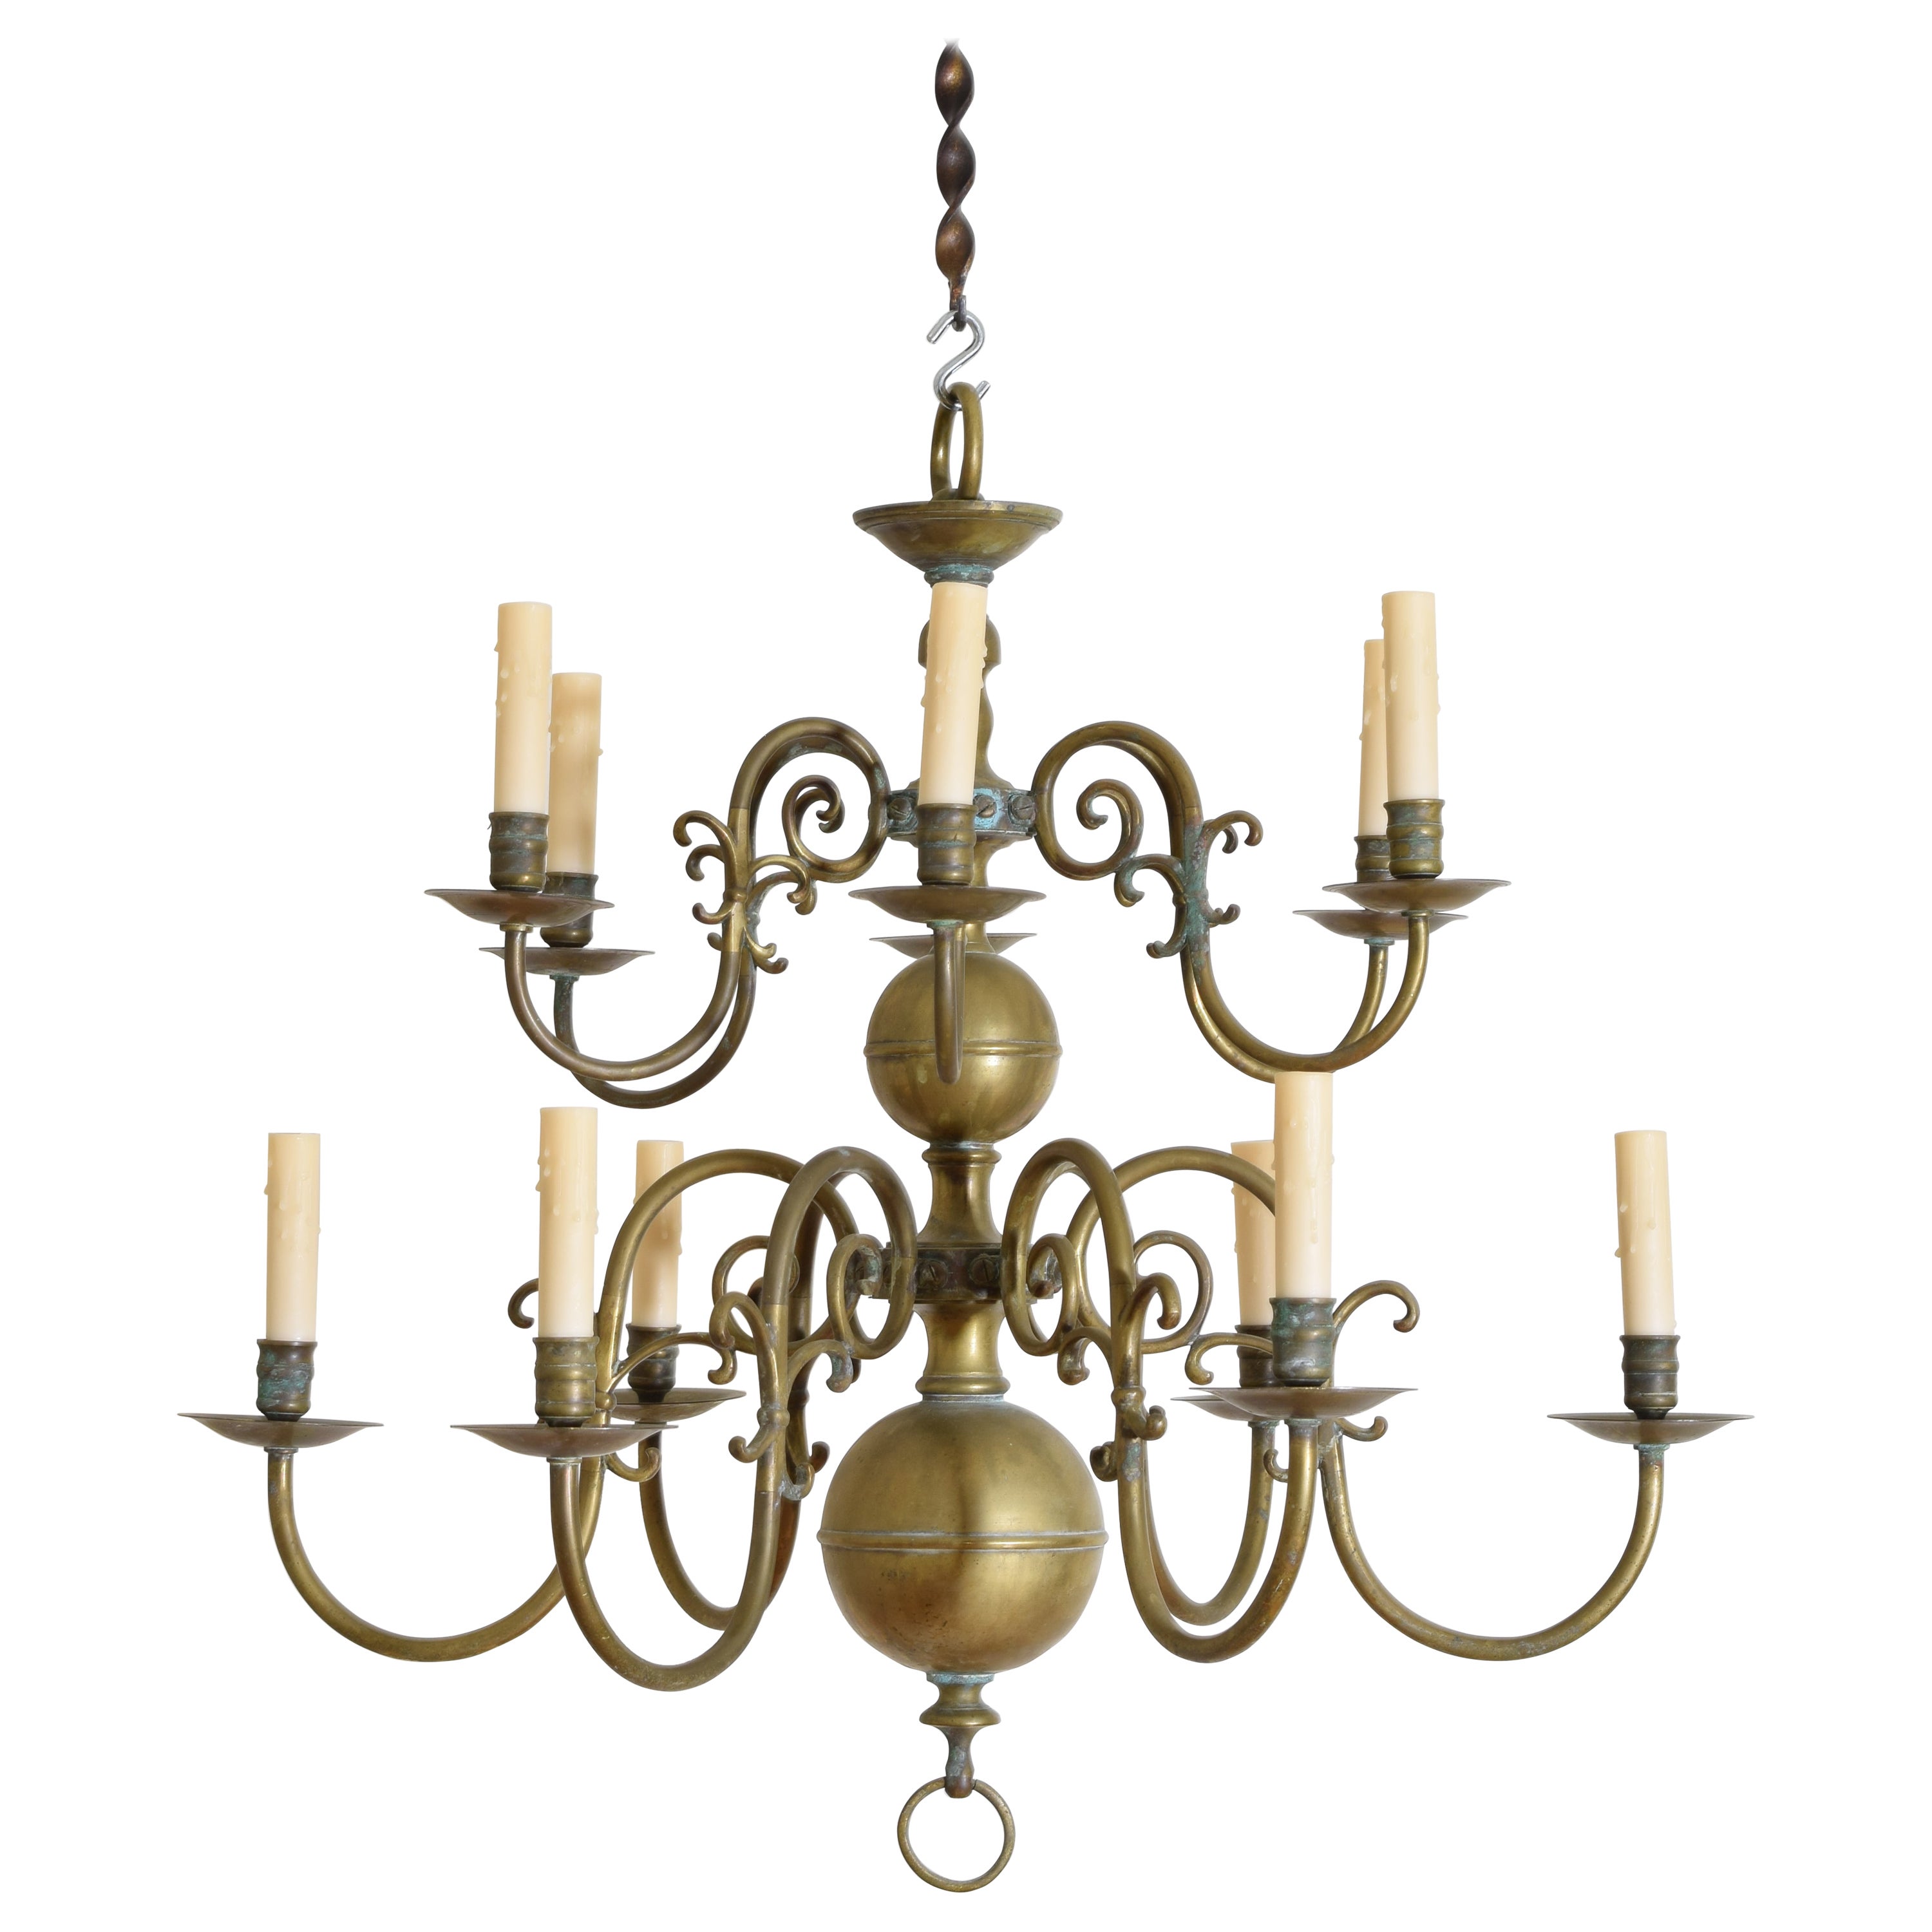 Dutch or French Patinated Brass 2-Tier 12-Light Chandelier, 2nd half 19th cen. For Sale